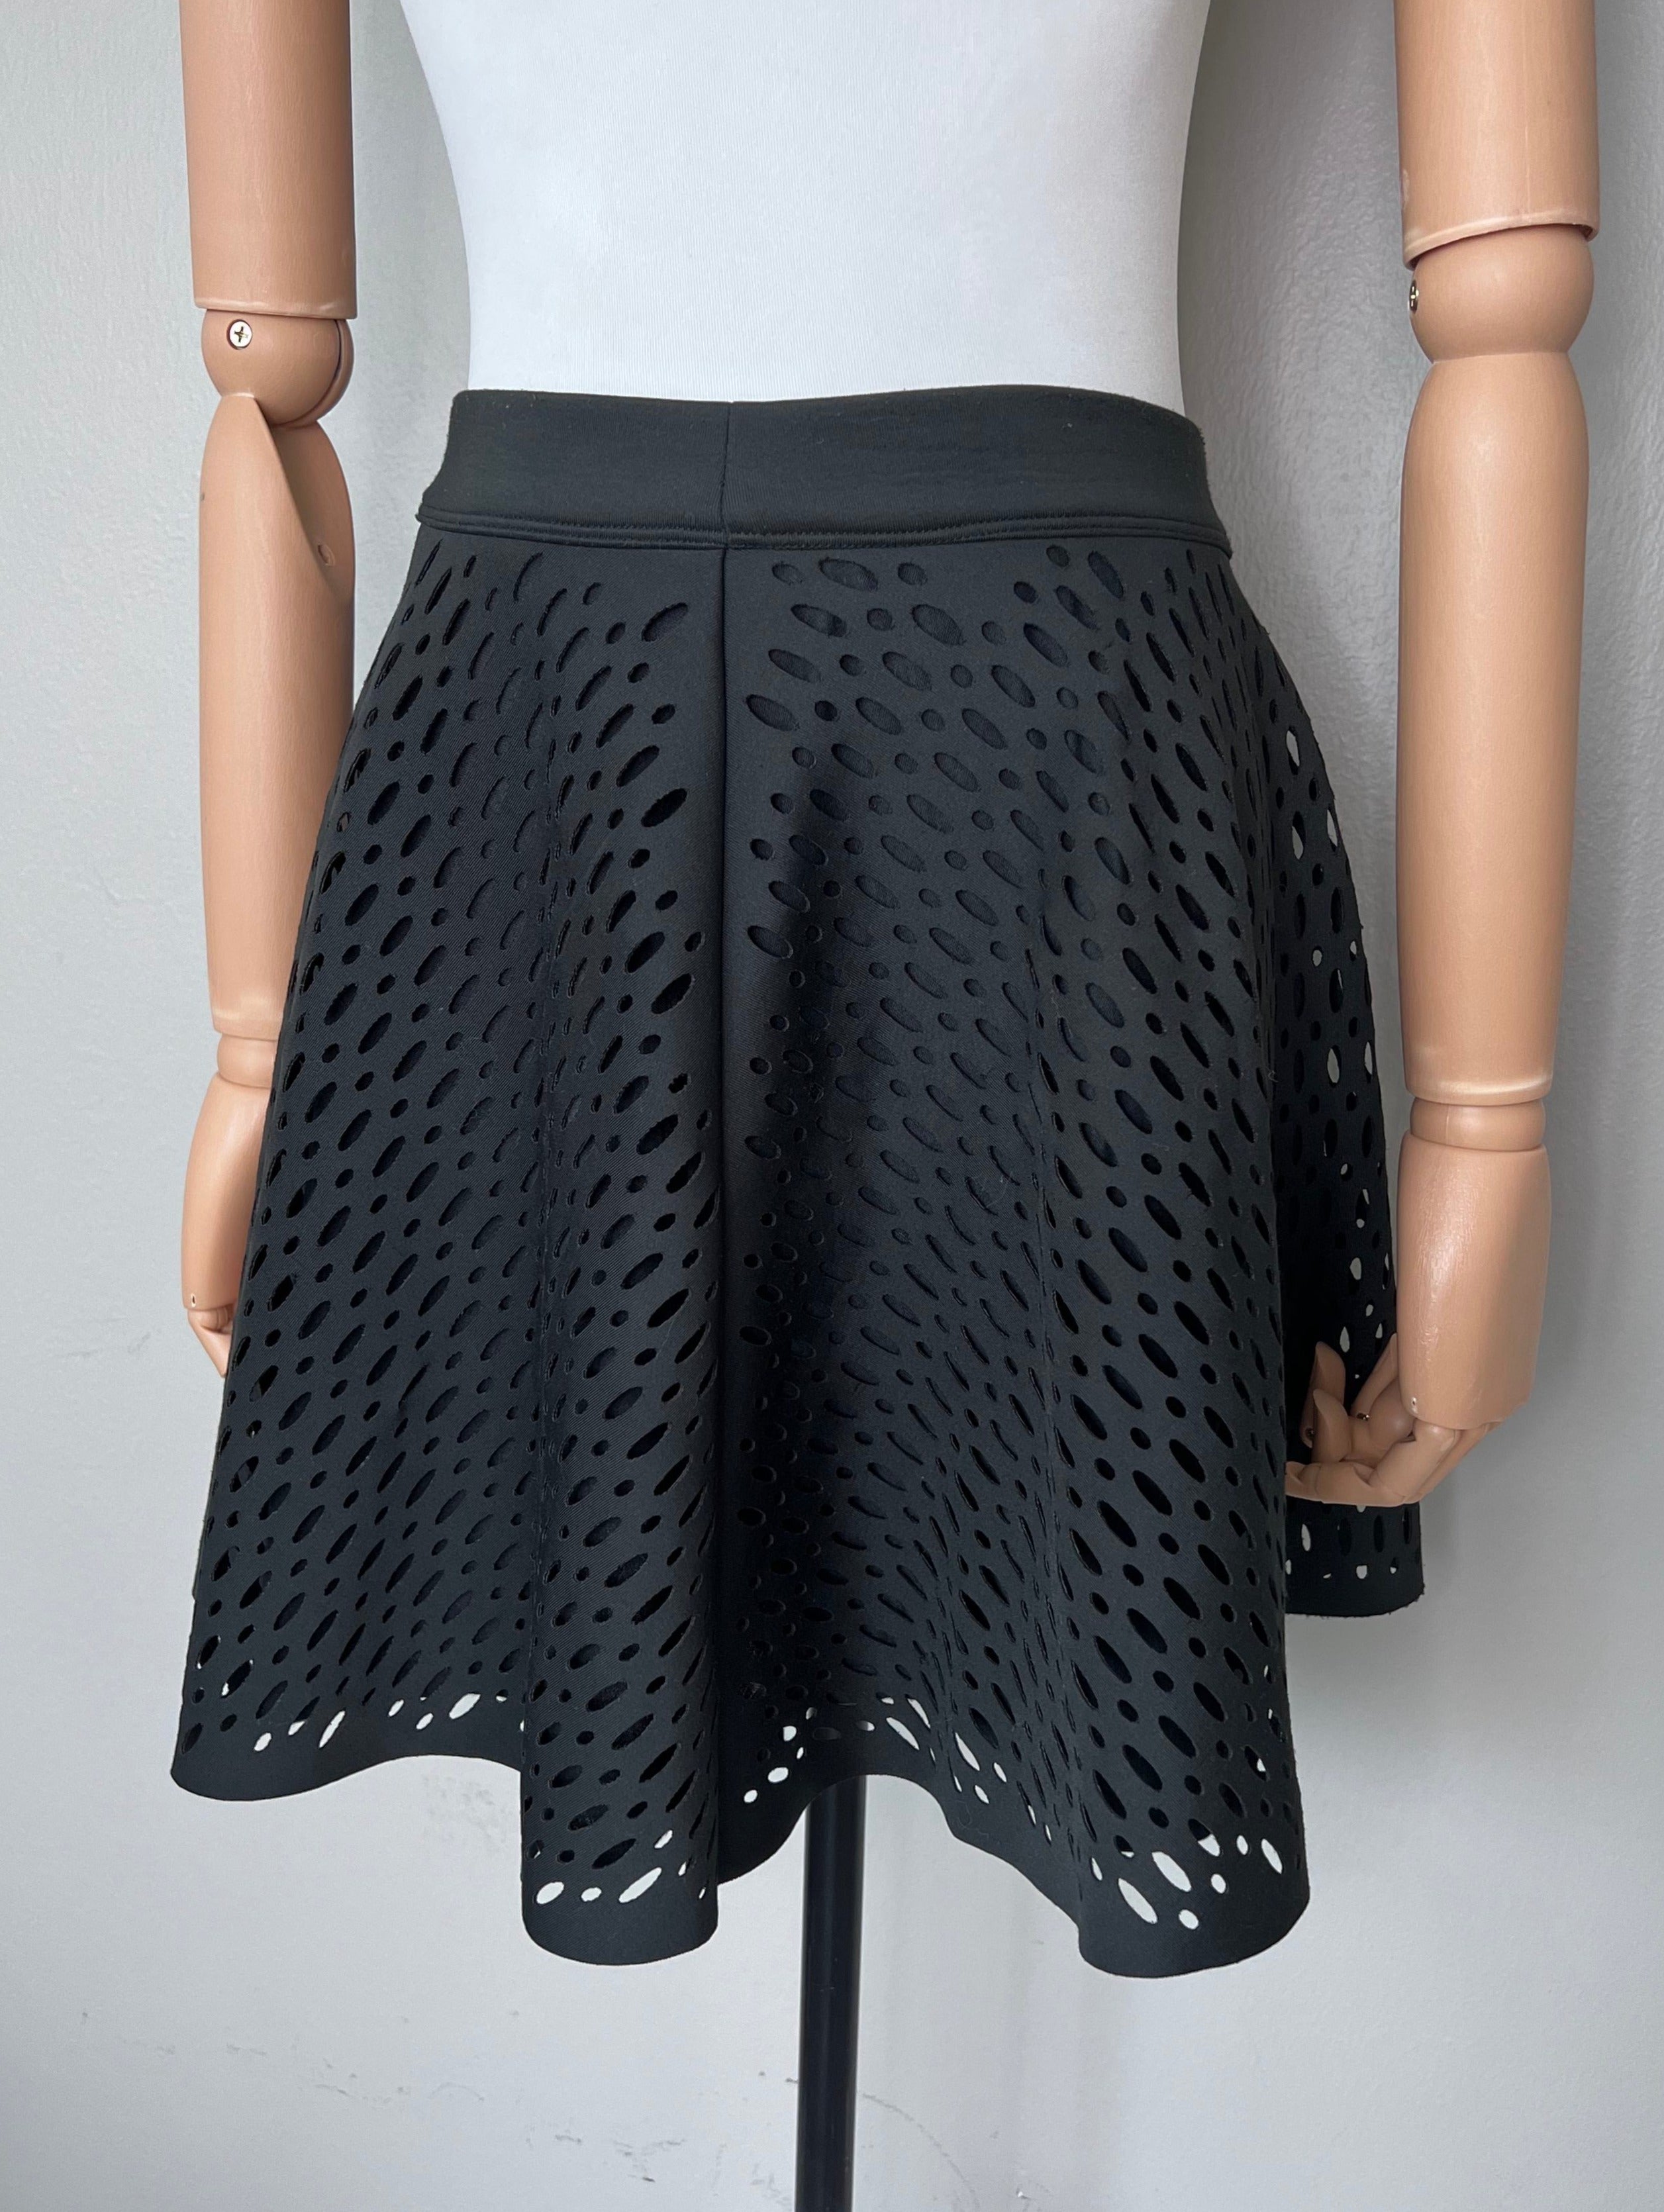 Flowy short black skirt - Abrecrombie&Fitch